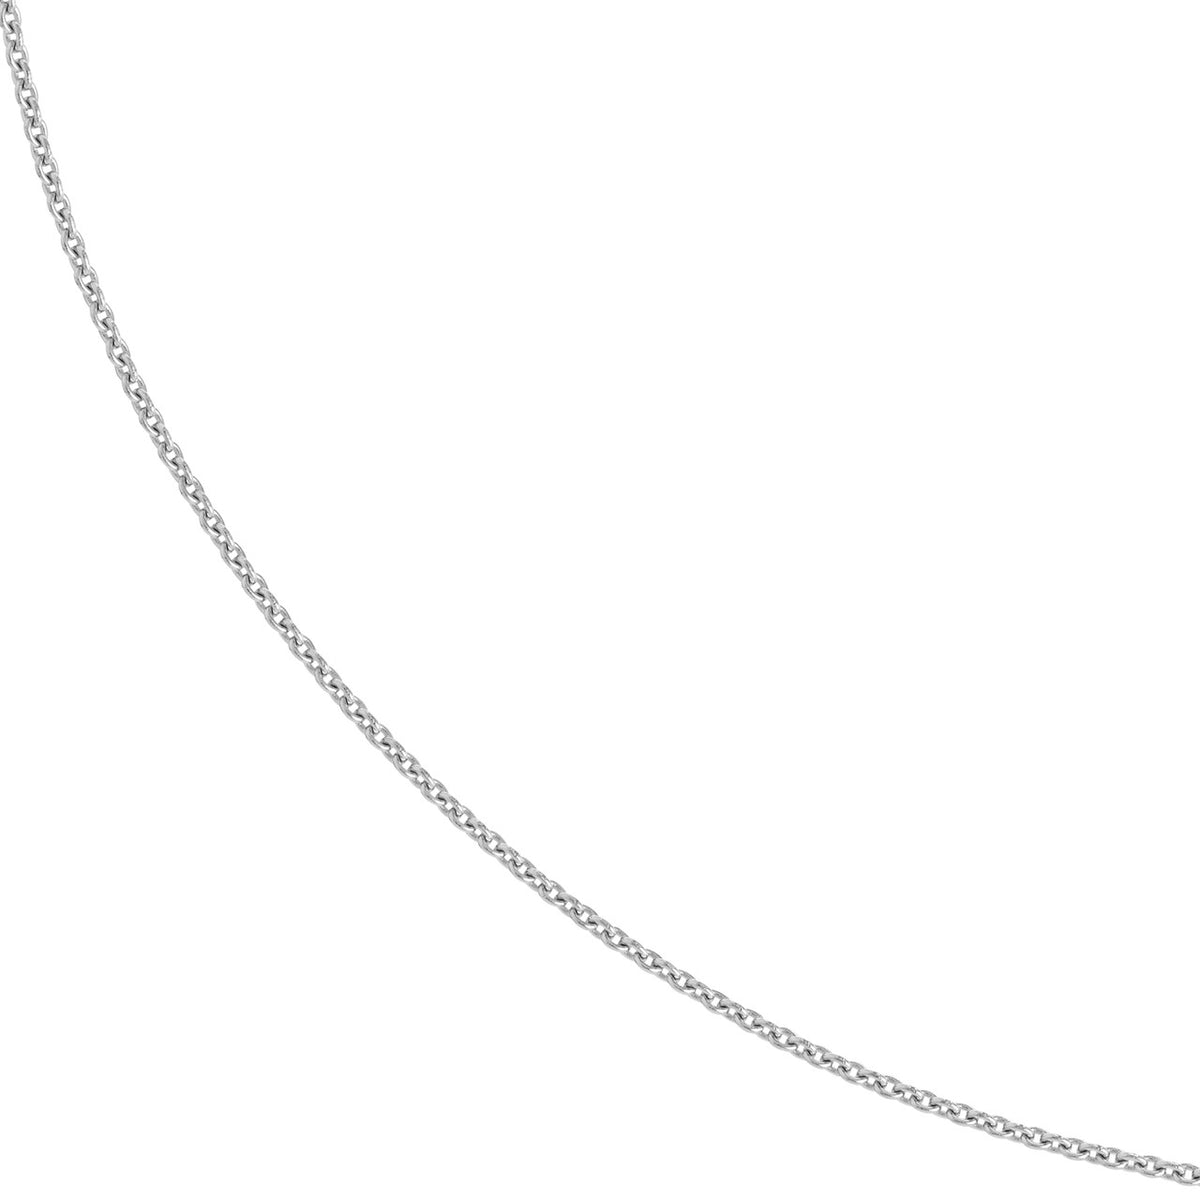 14K Yellow Gold and White Gold 0.9mm Cable Chain Necklace with Lobster Lock